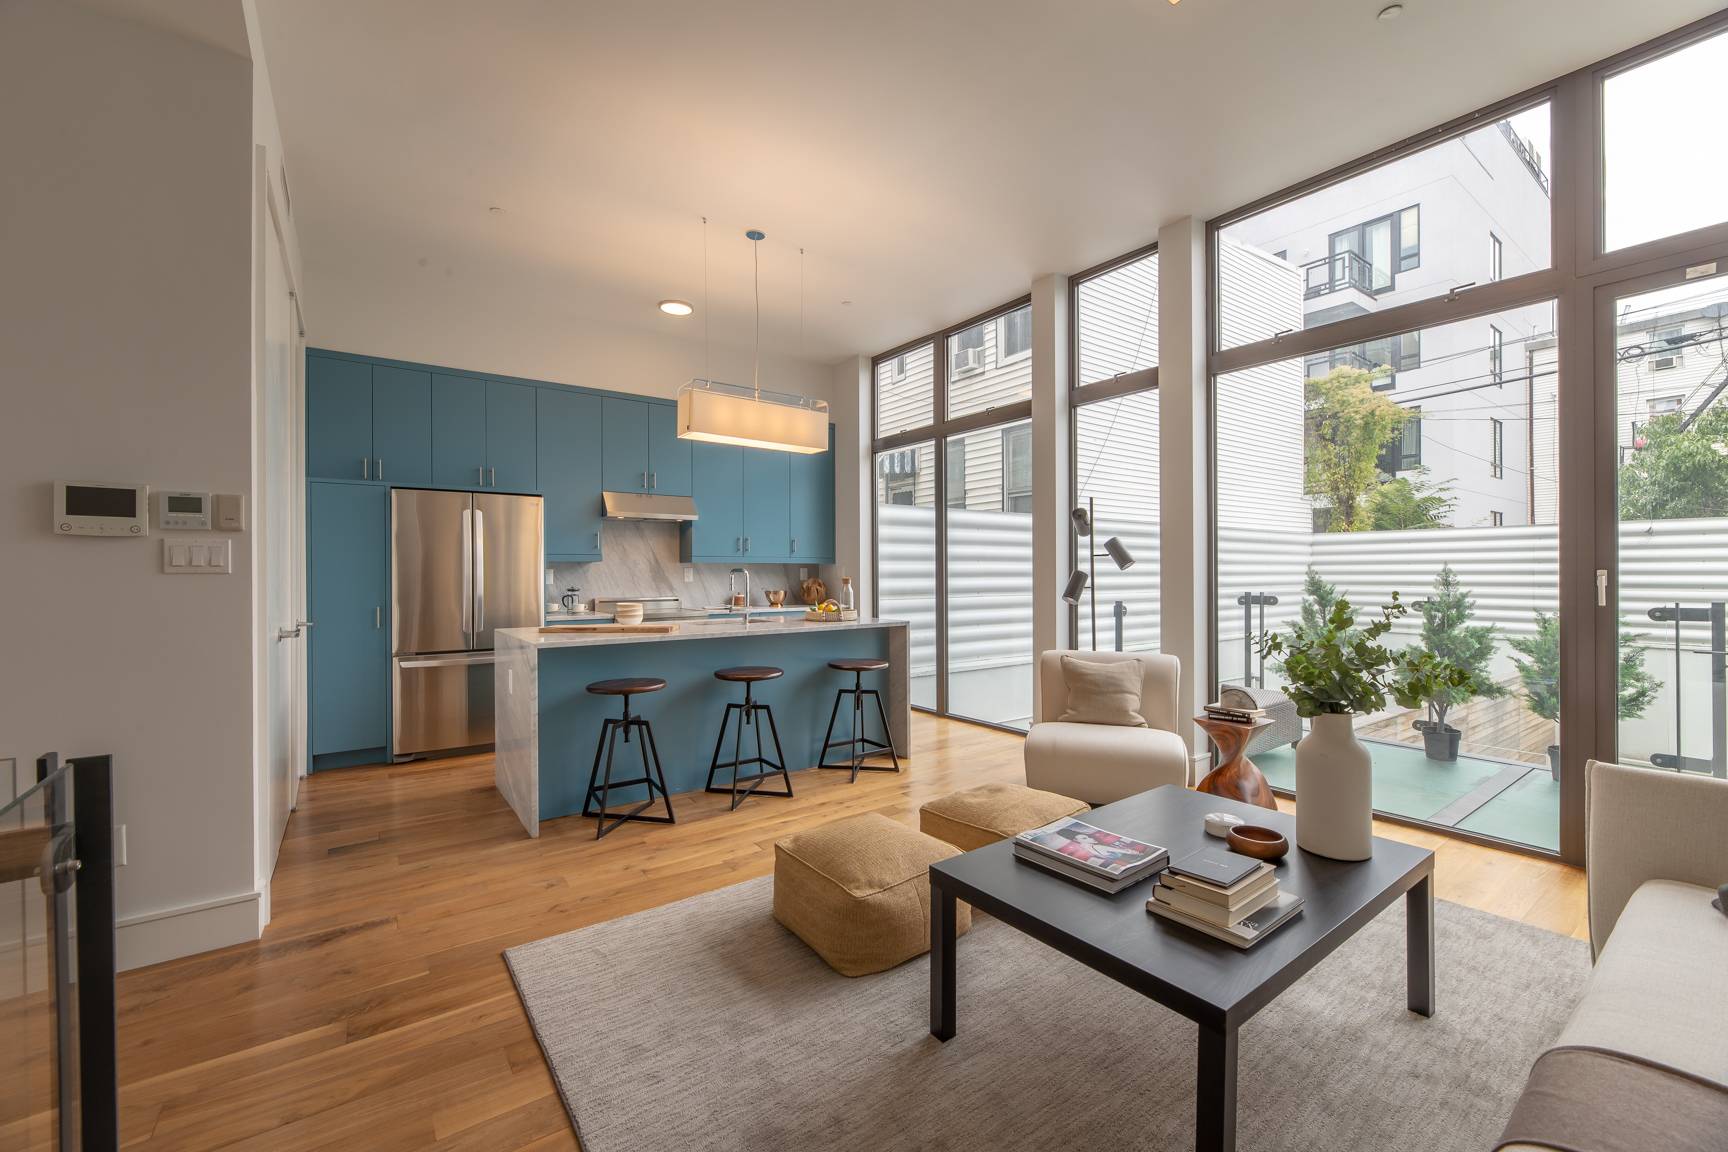 Welcome to 237 Devoe Street, a captivating addition to the East Williamsburg neighborhood.